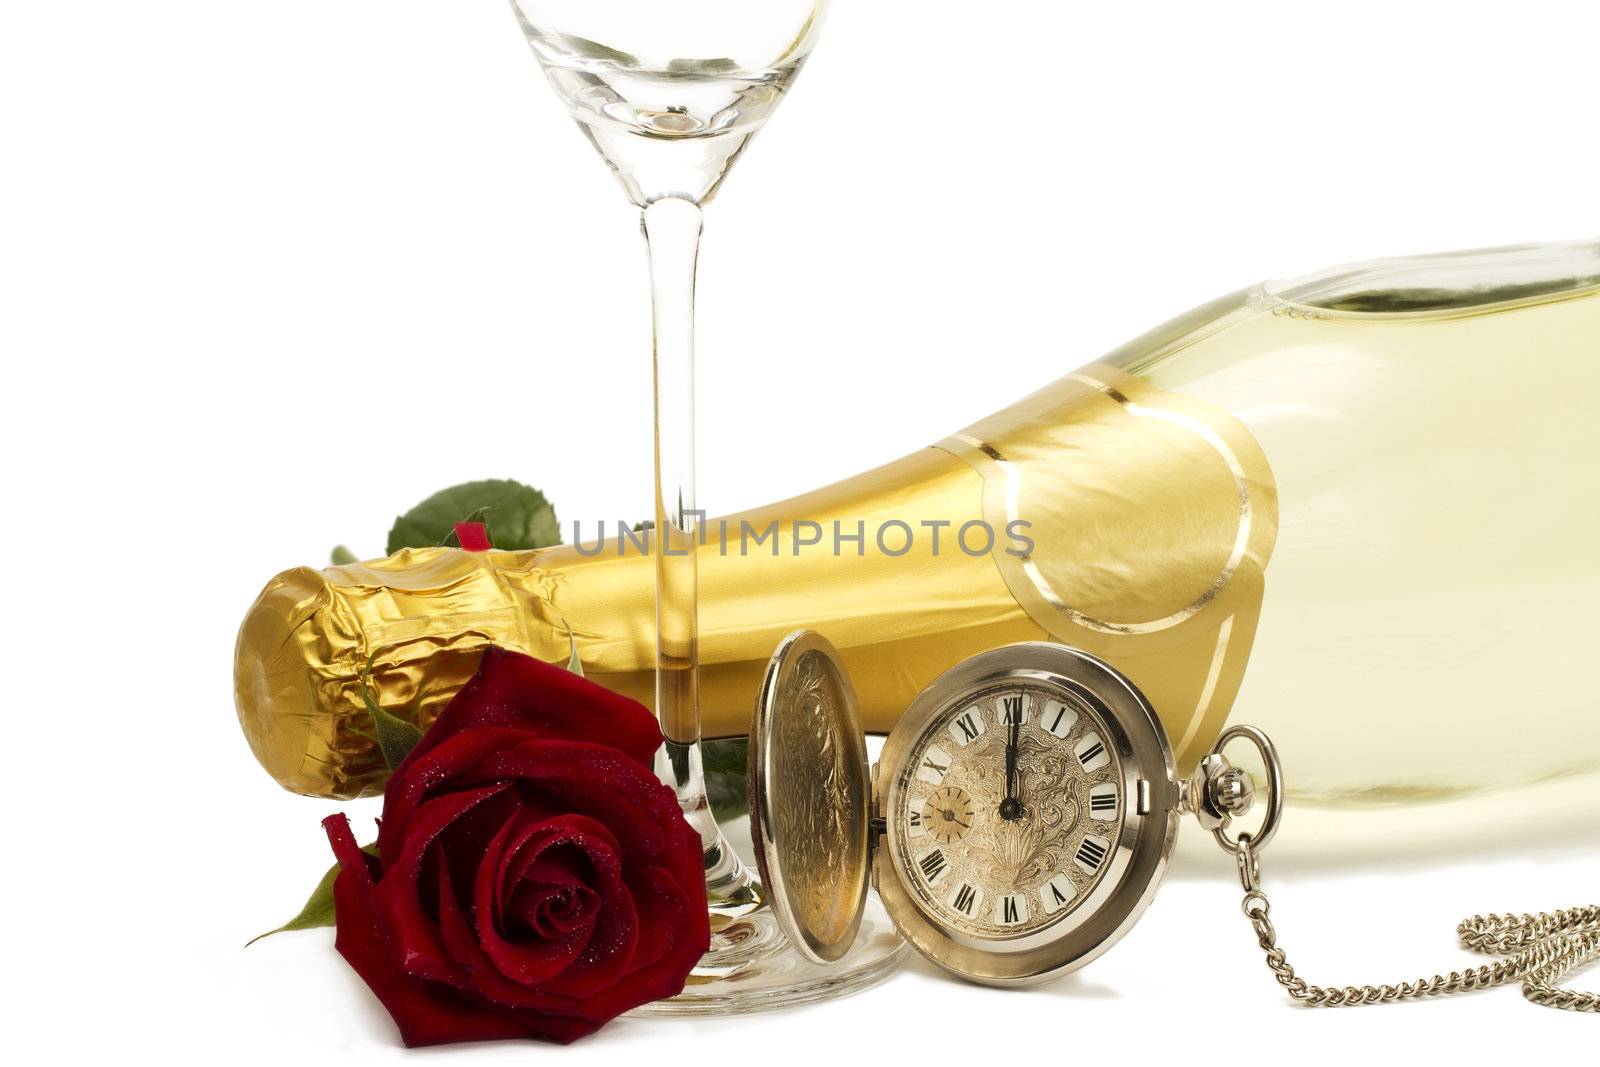 wet red rose under a champagne bottle with a old pocket watch and a empty champagne glass on white background